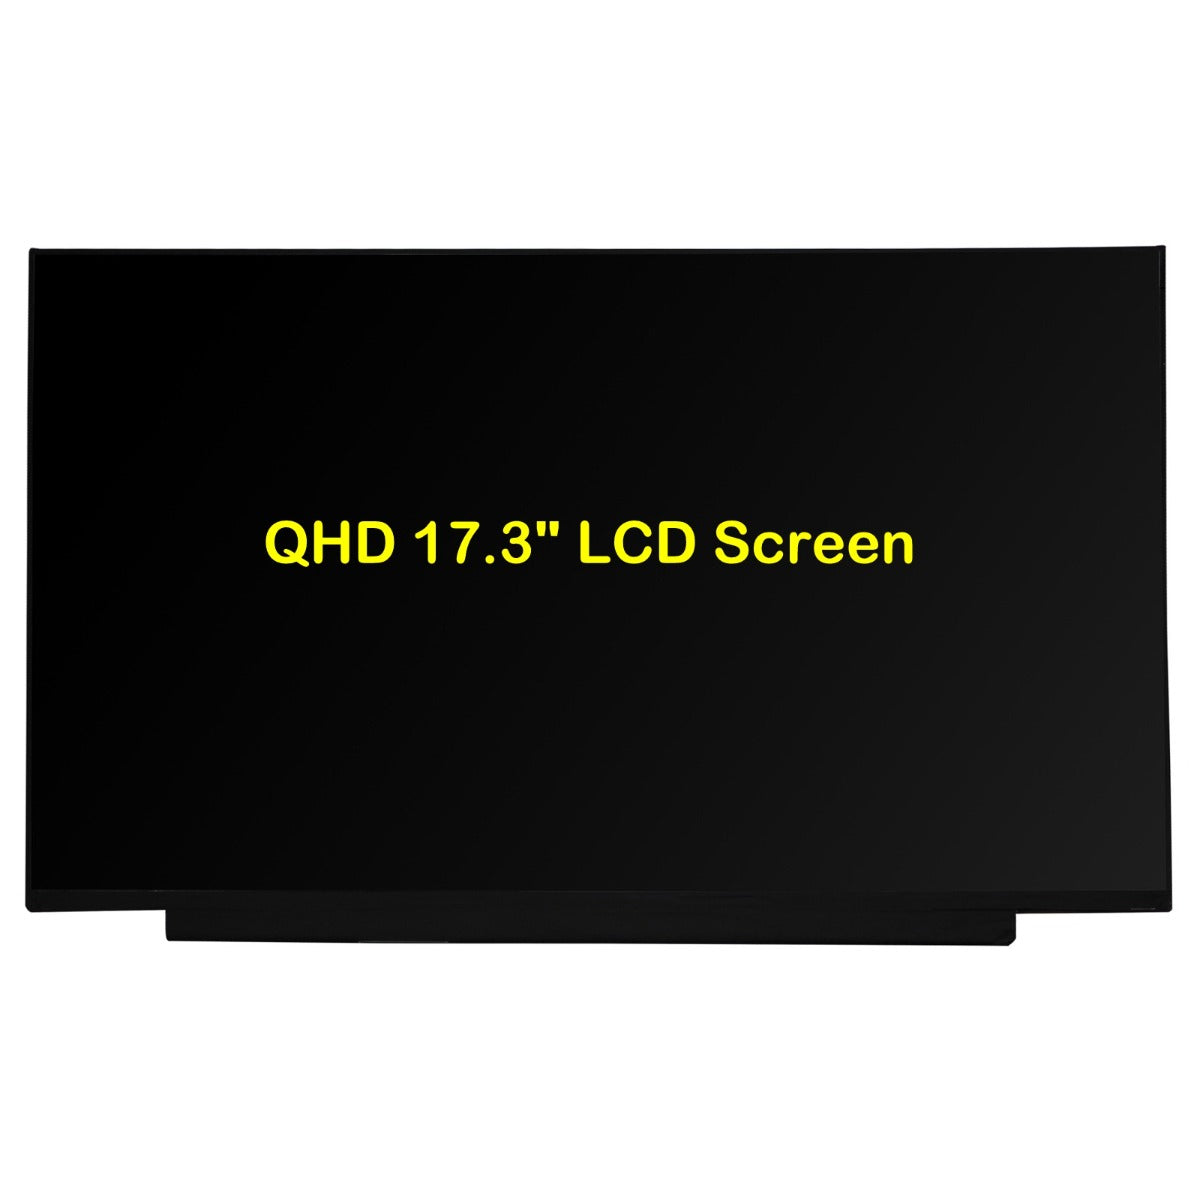 New Replacement For NE173QHM-NY2 QHD 2560x1440 17.3" 165Hz 40 pin LED Screen Compatible With NE173QHM-NY1 V8.0